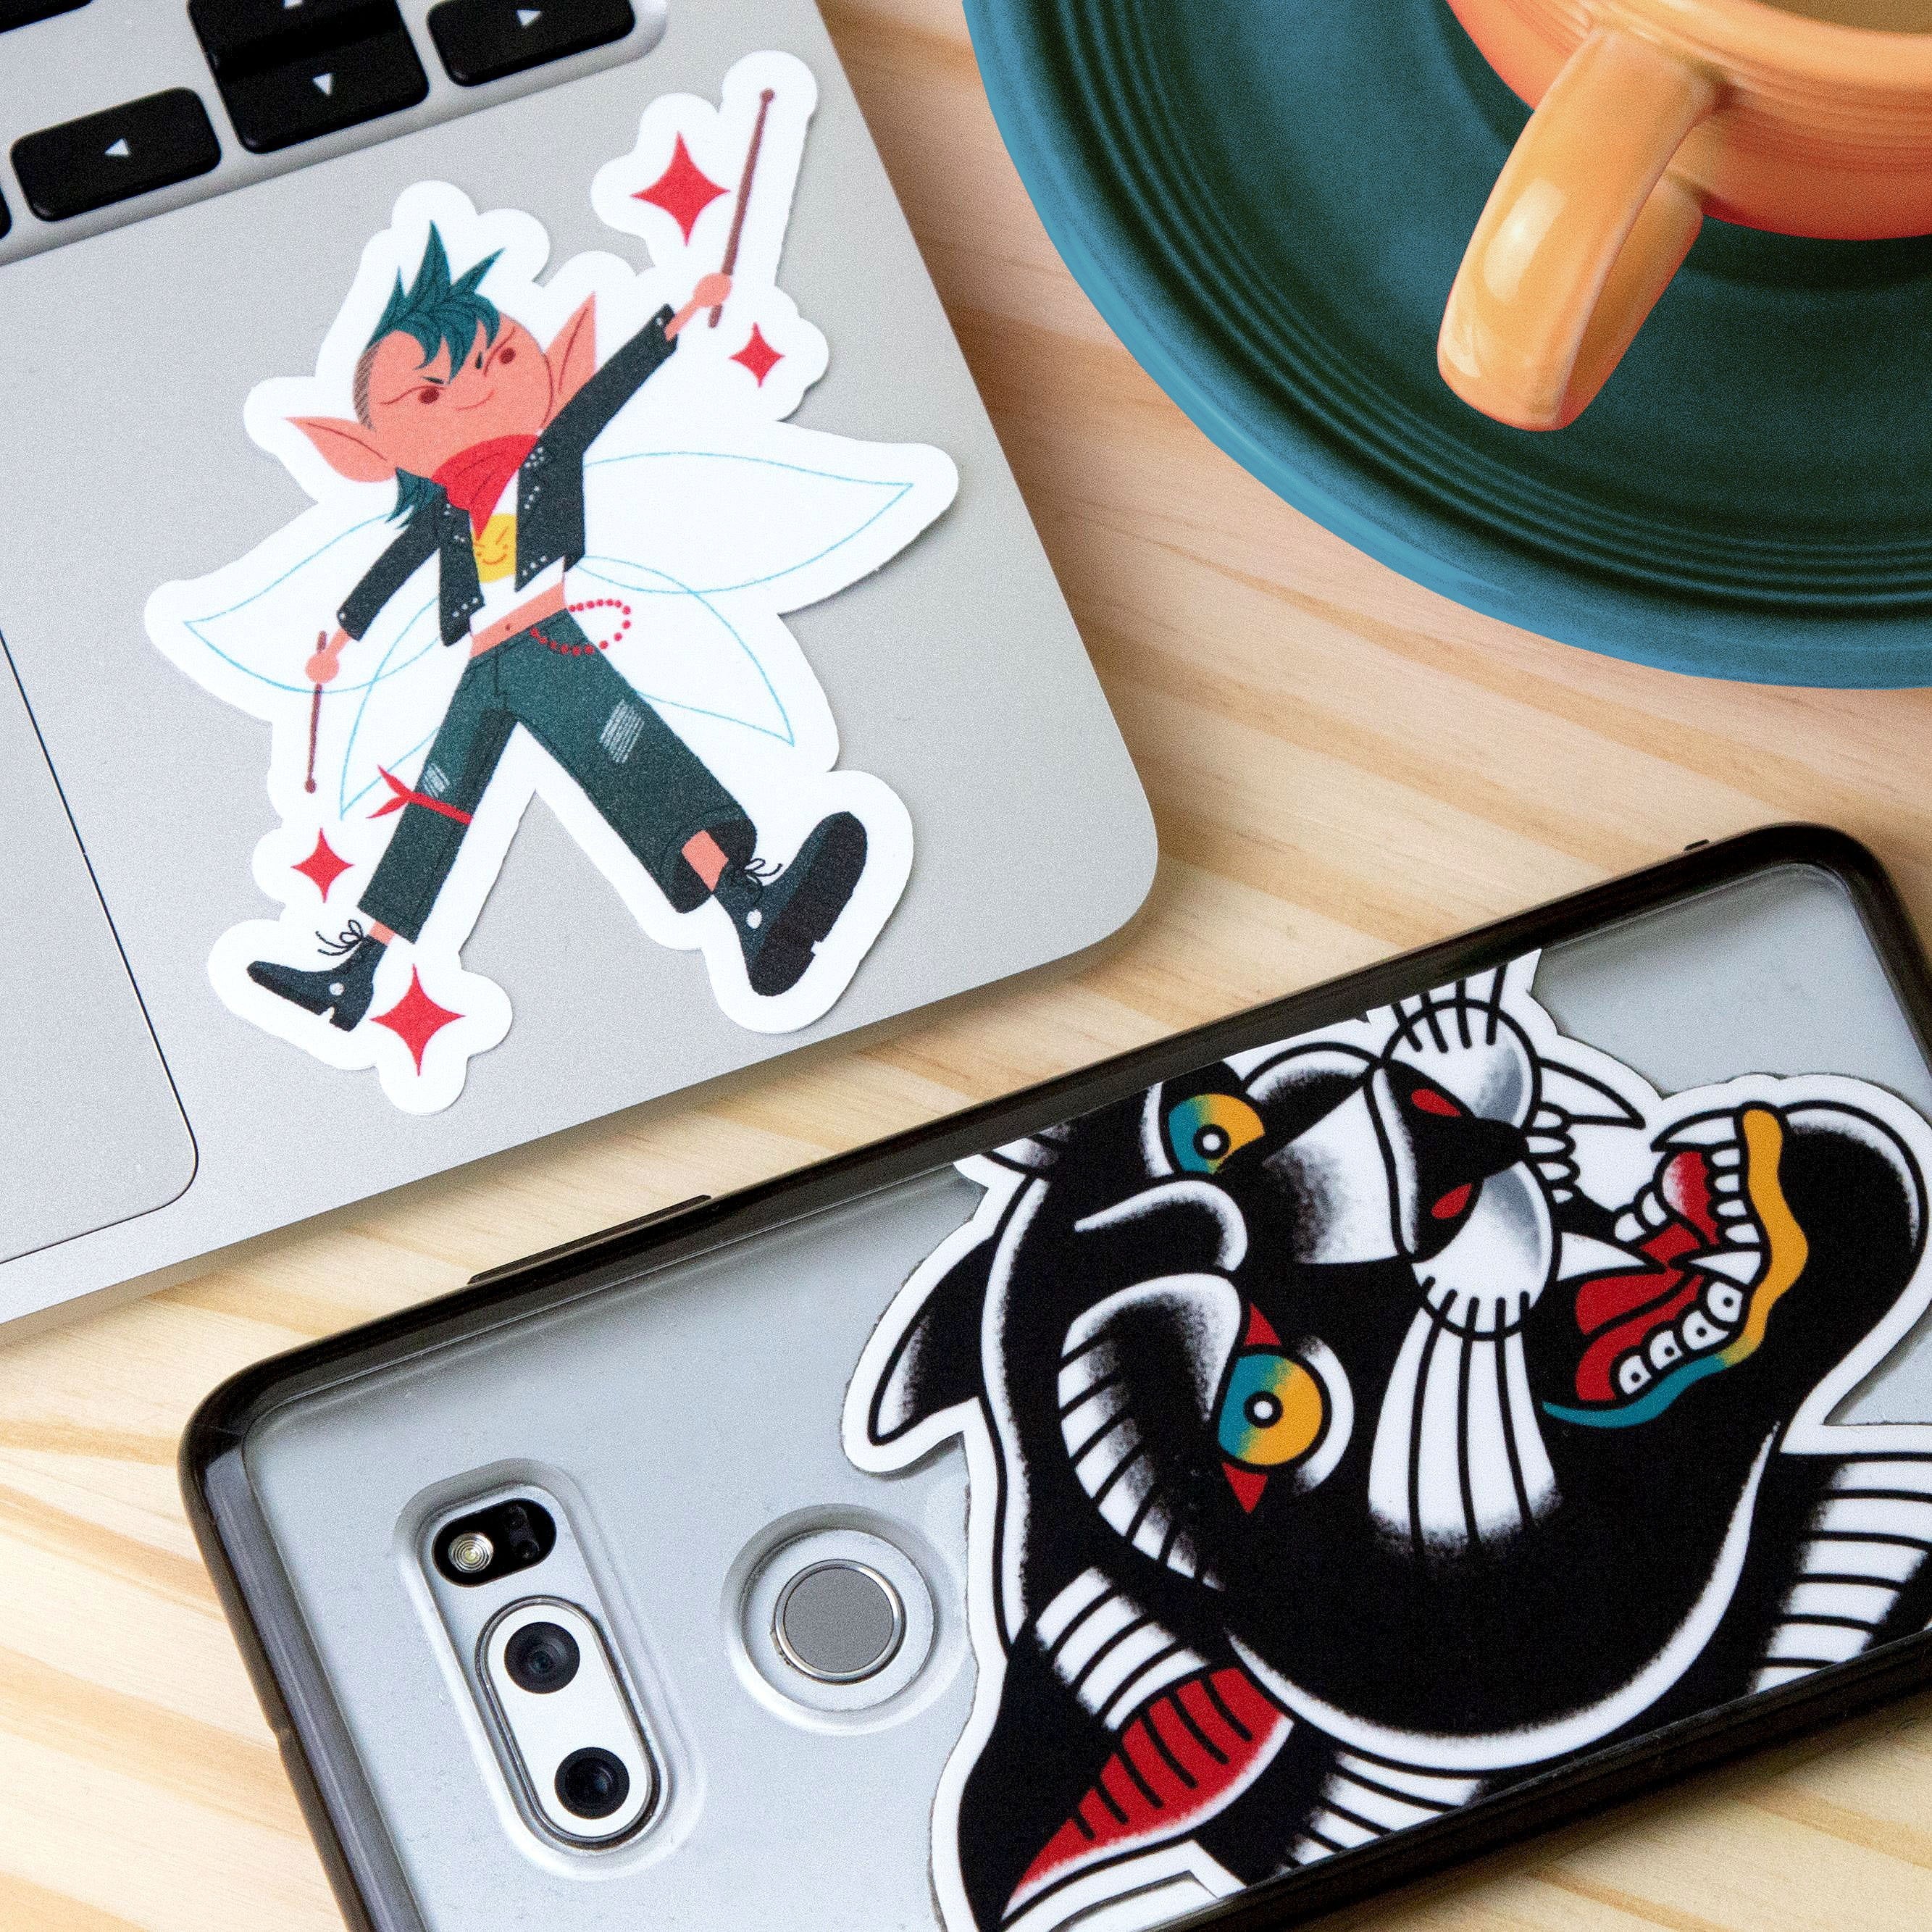 Jazzy Joules and Panther vinyl stickers for laptops and cellphones